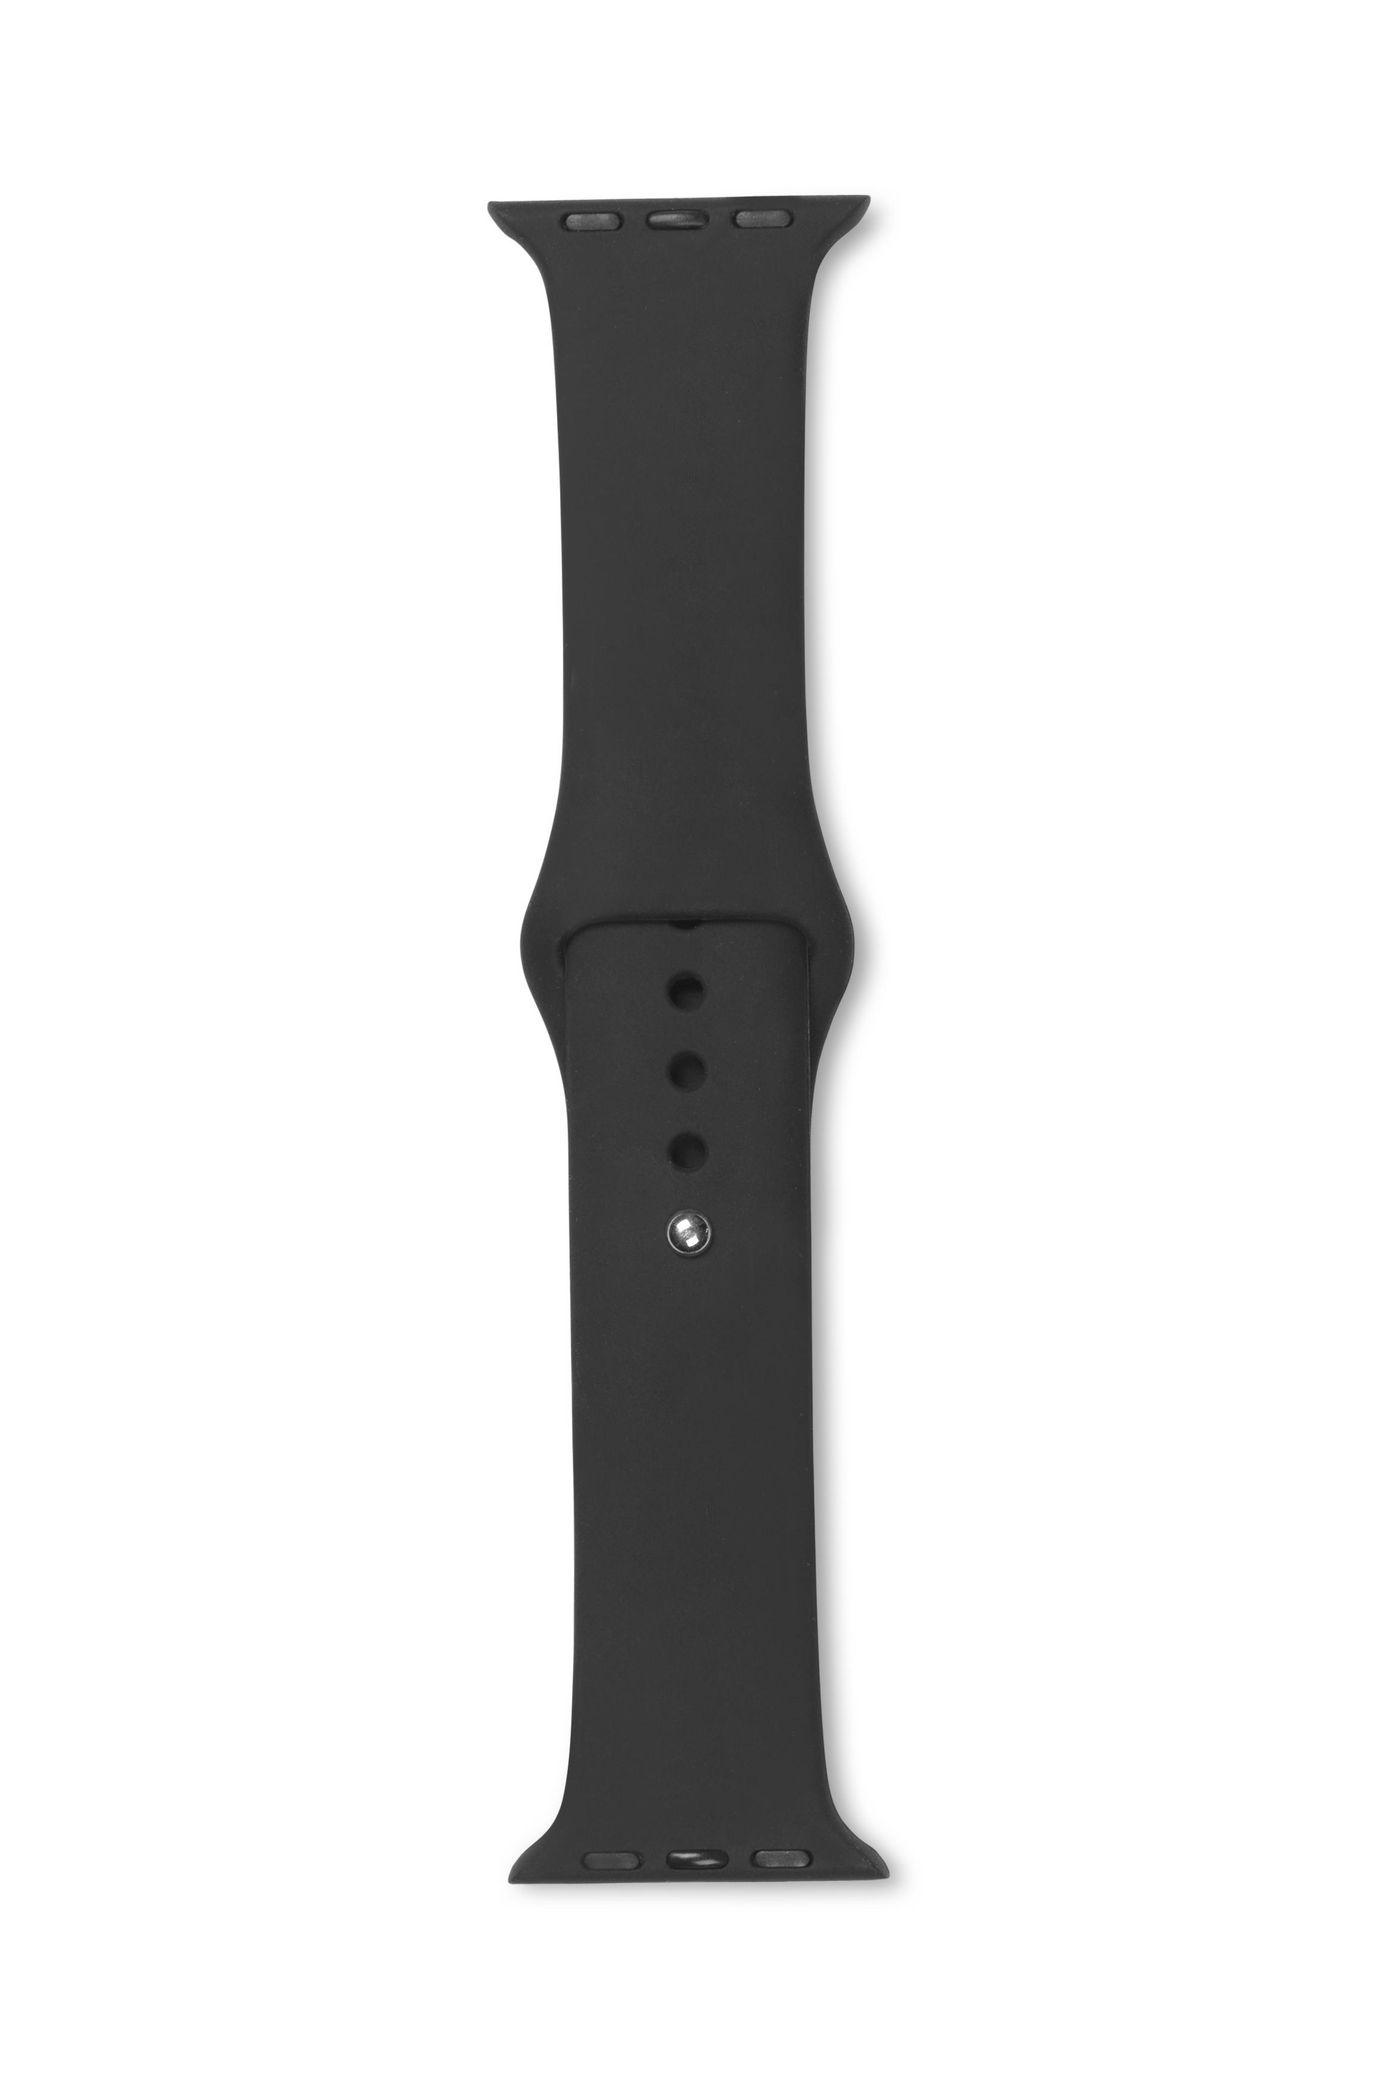 Apple Watch Silicone Strap Color: Black Width 44mm